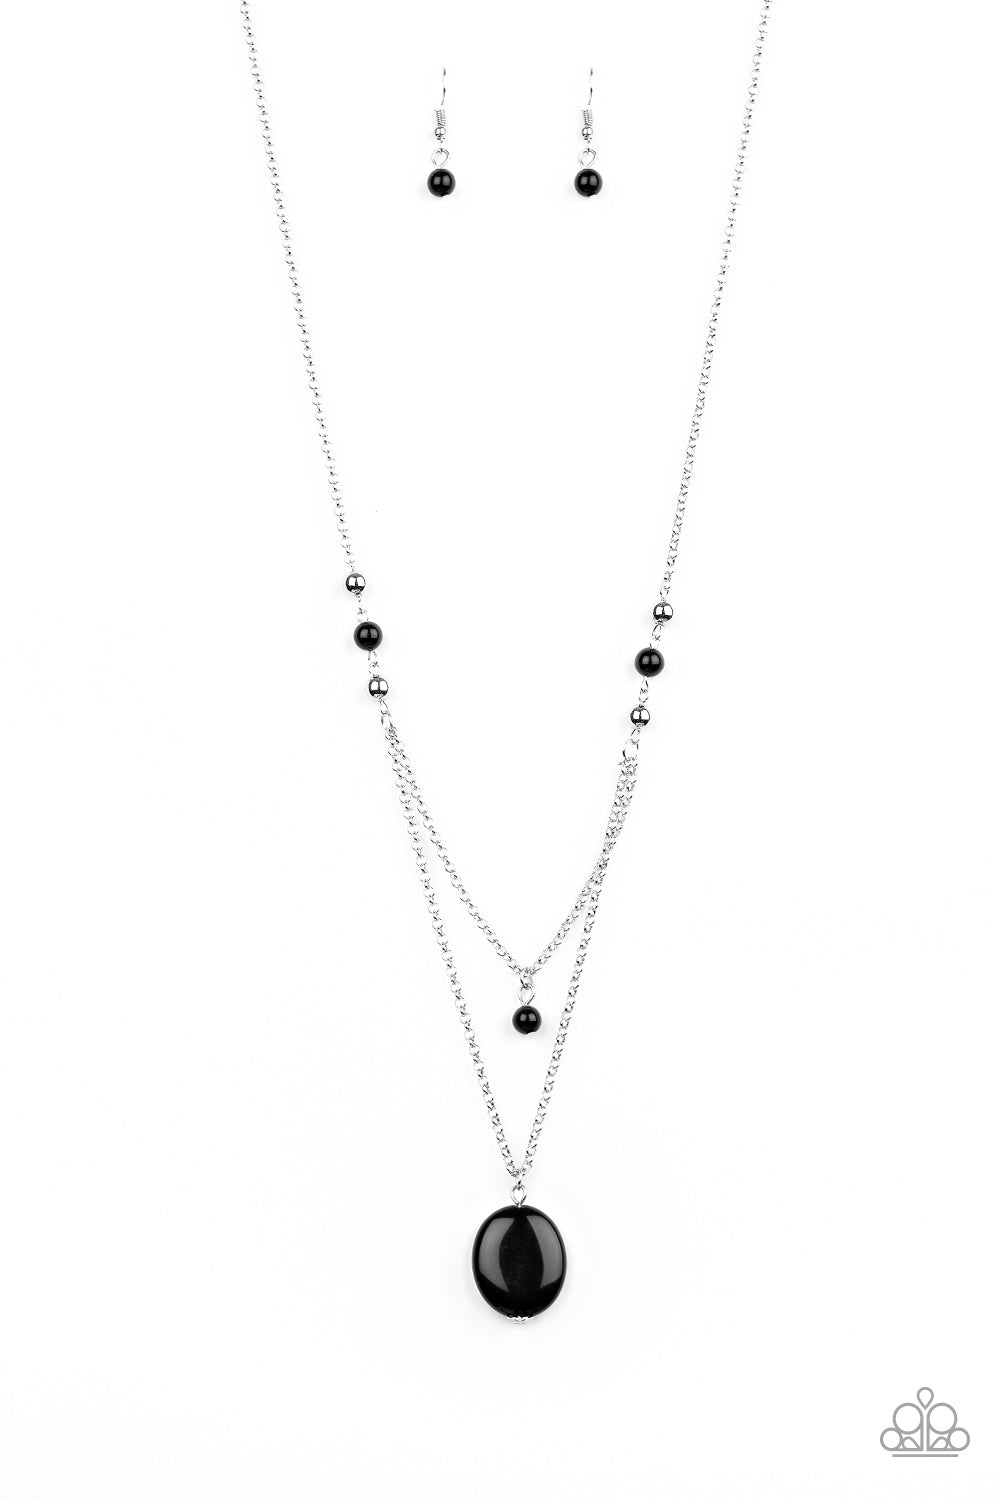 TIME TO HIT THE ROAM - BLACK OVAL NATURAL STONE DAINTY NECKLACE